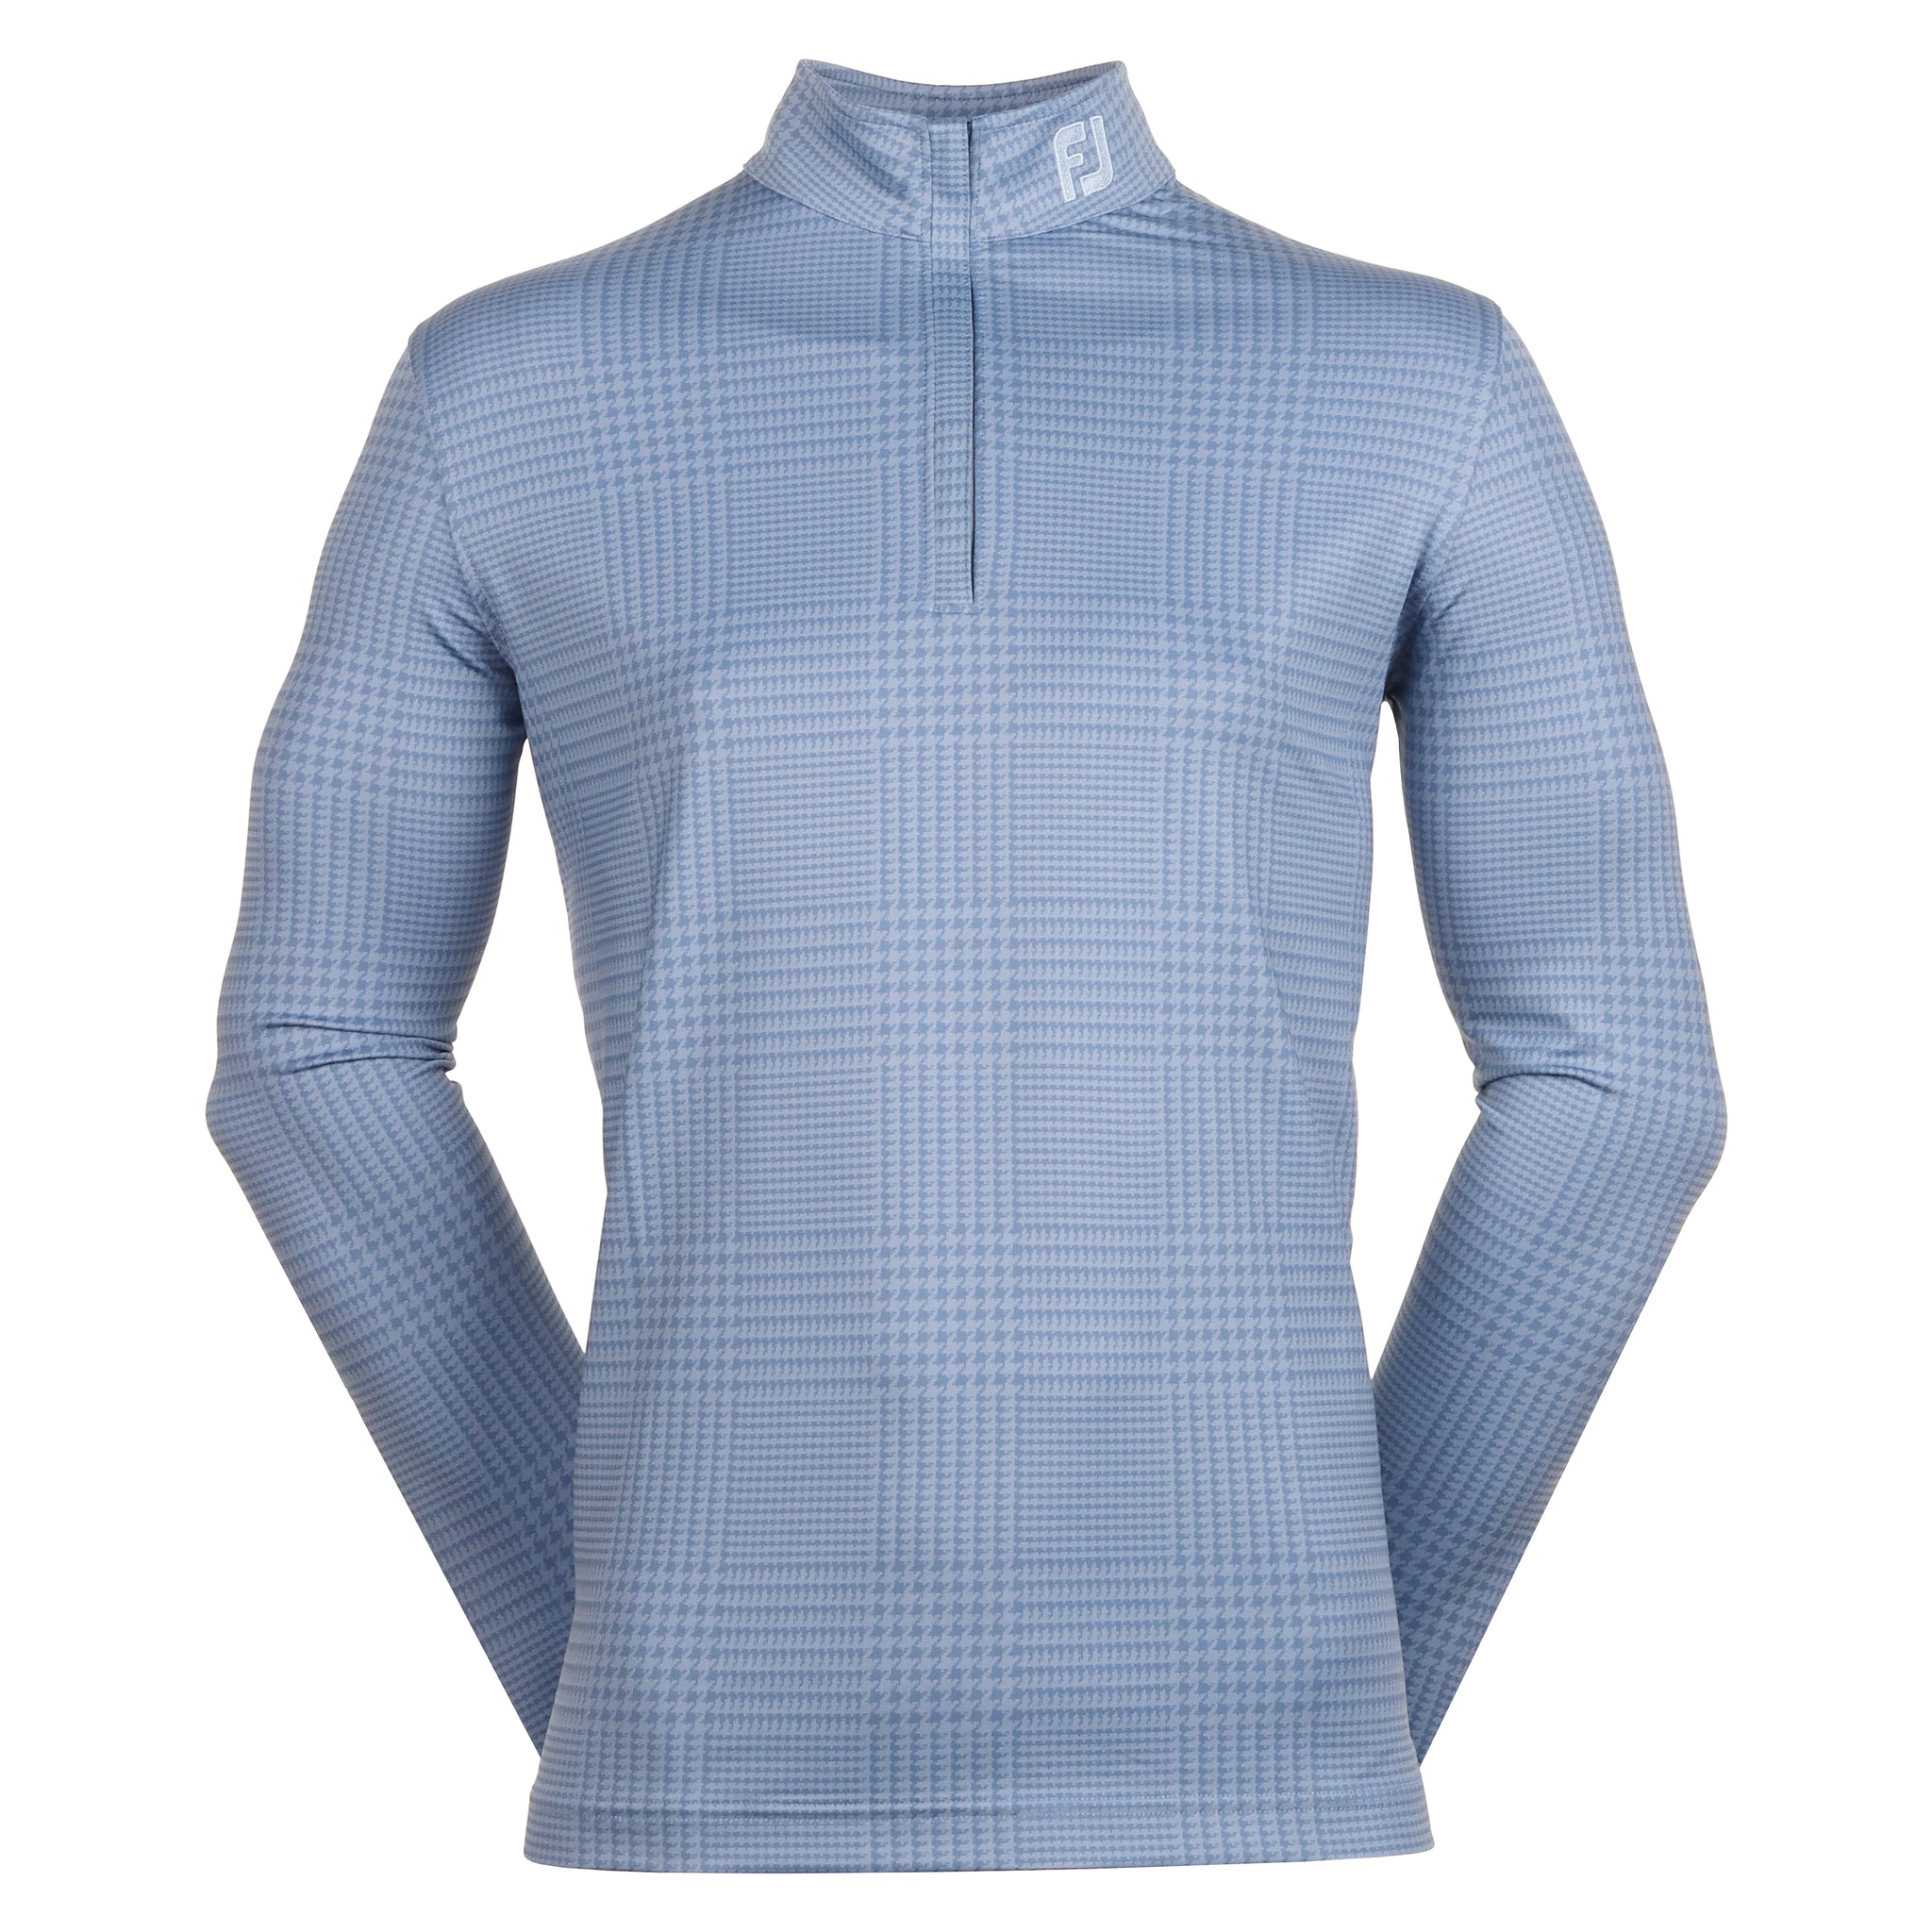 footjoy-glen-plaid-print-chill-out-pullover-81637-storm